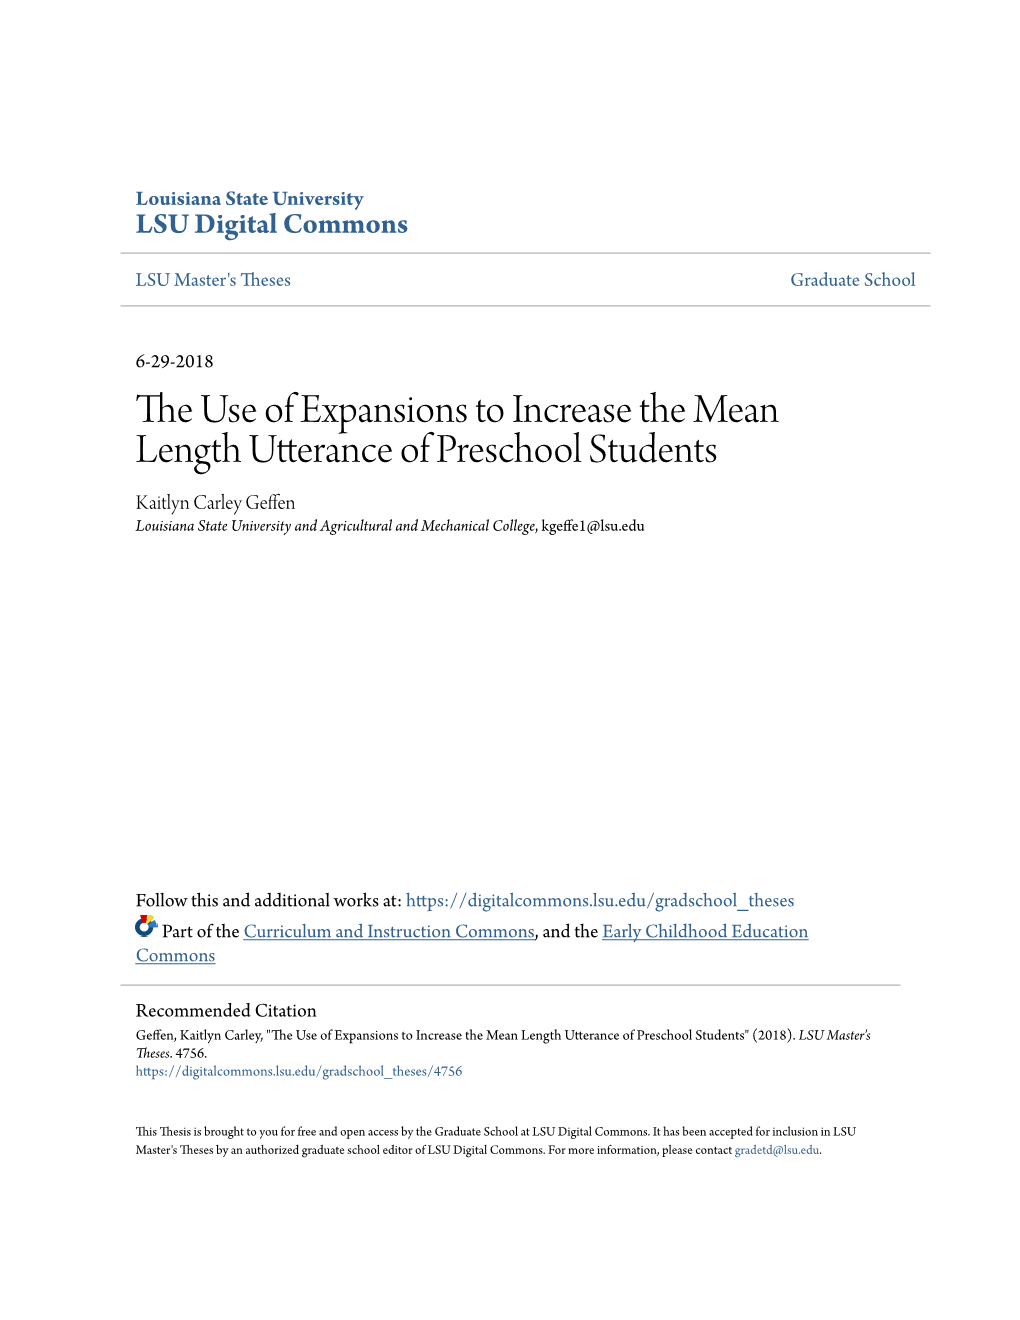 The Use of Expansions to Increase the Mean Length Utterance of Preschool Students